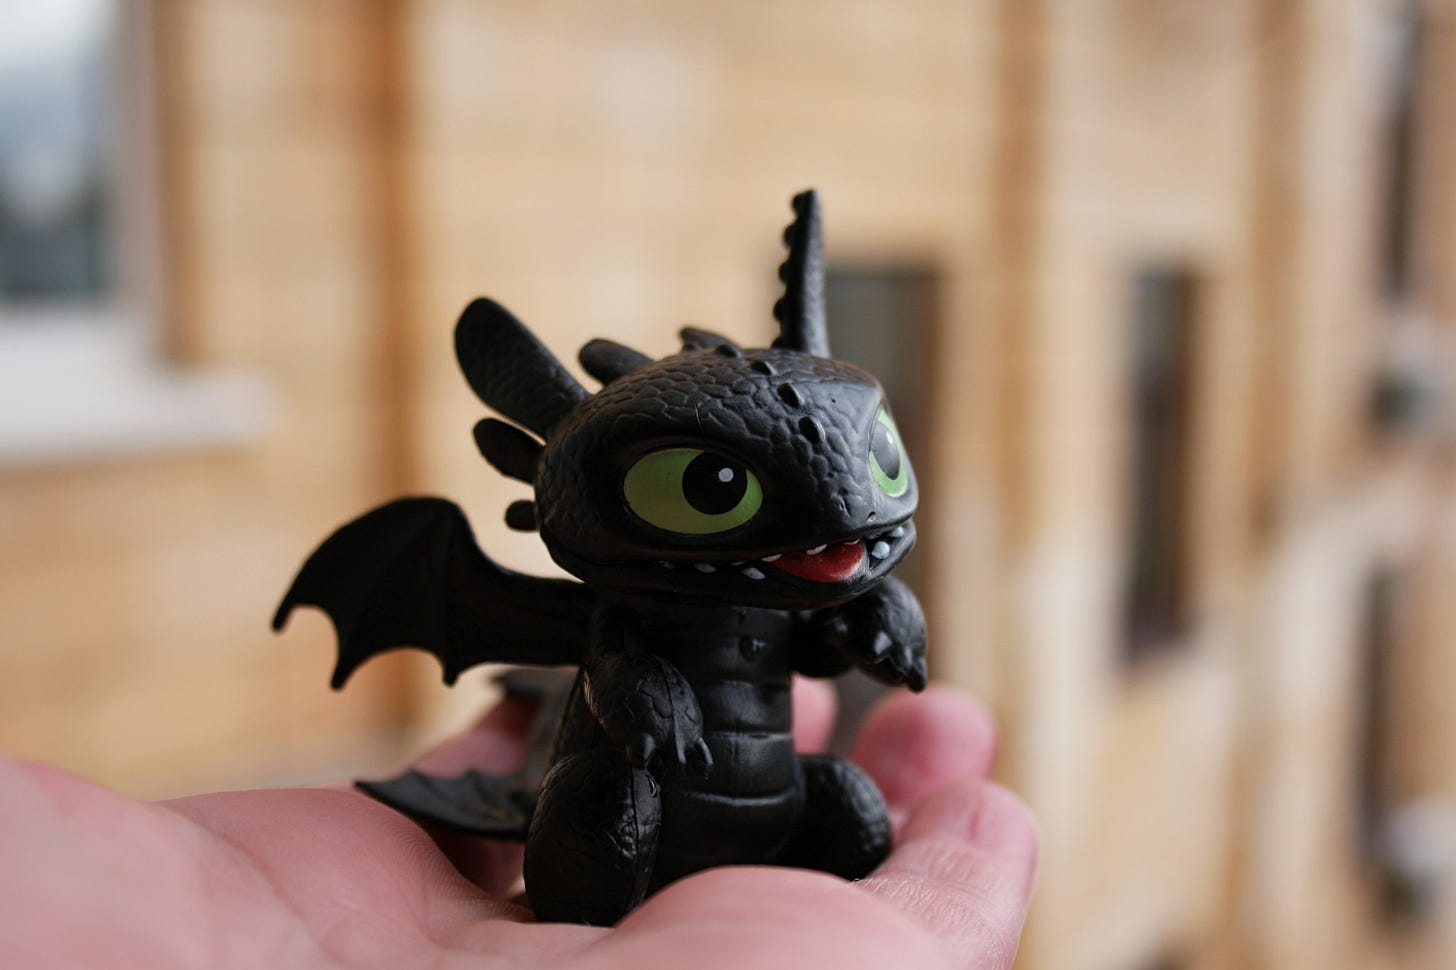 Toothless dragon toy from How to Train Your Dragon